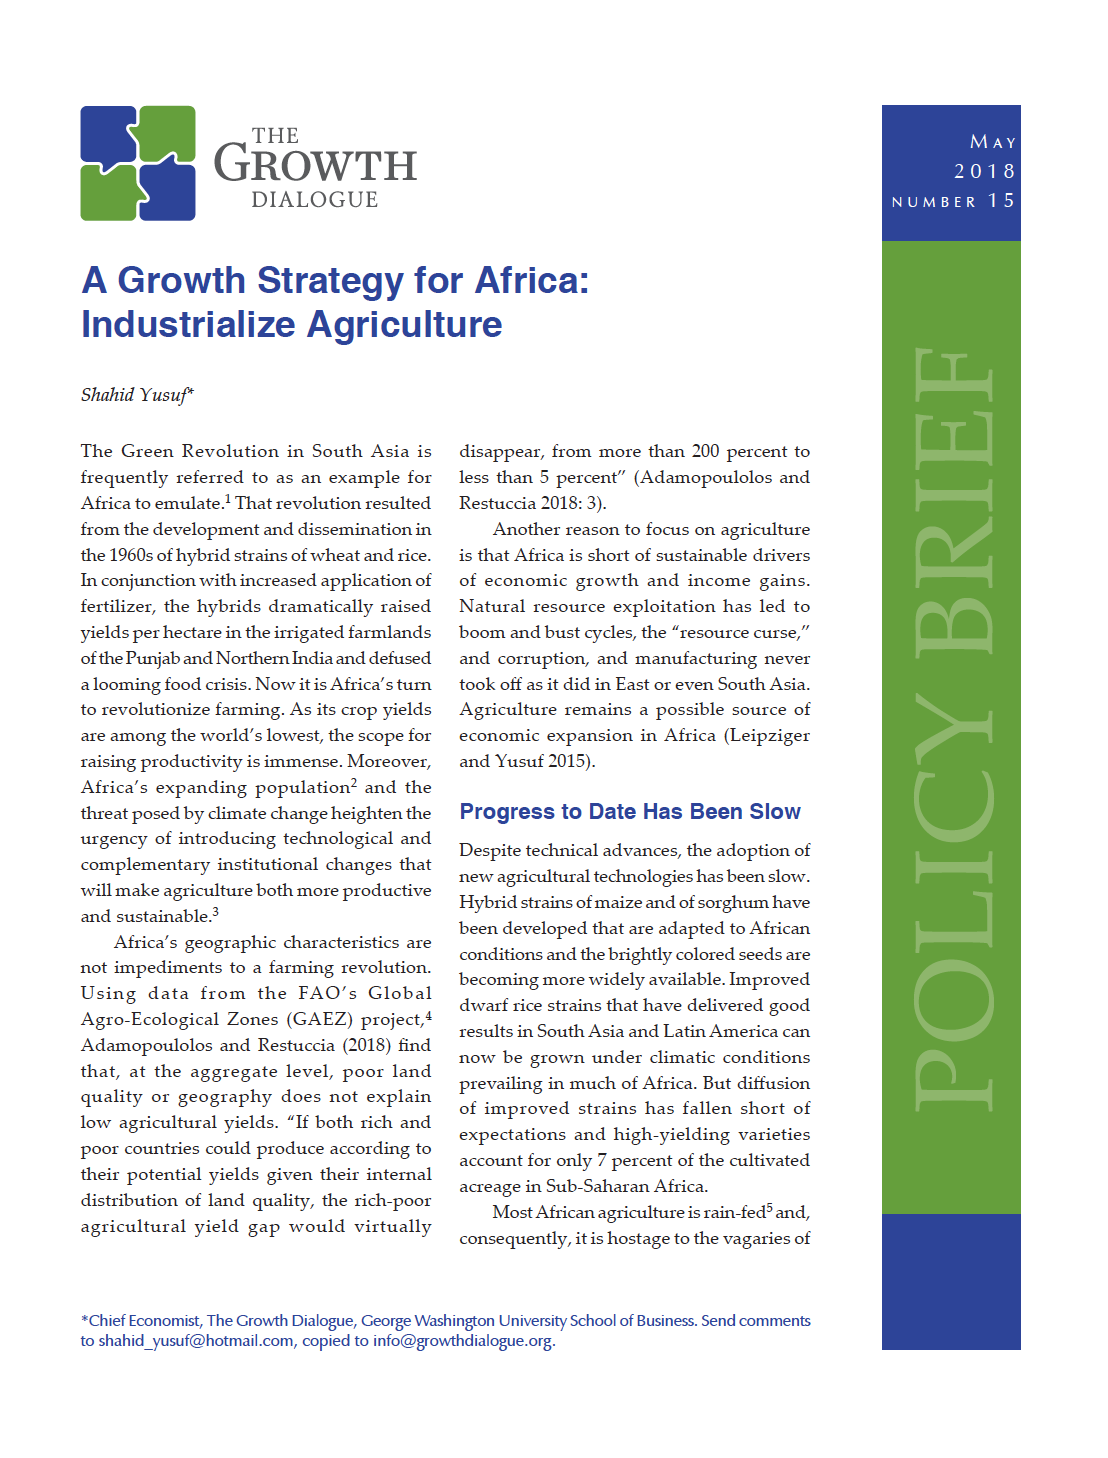 A Growth Strategy for Africa: Industrialize Agriculture